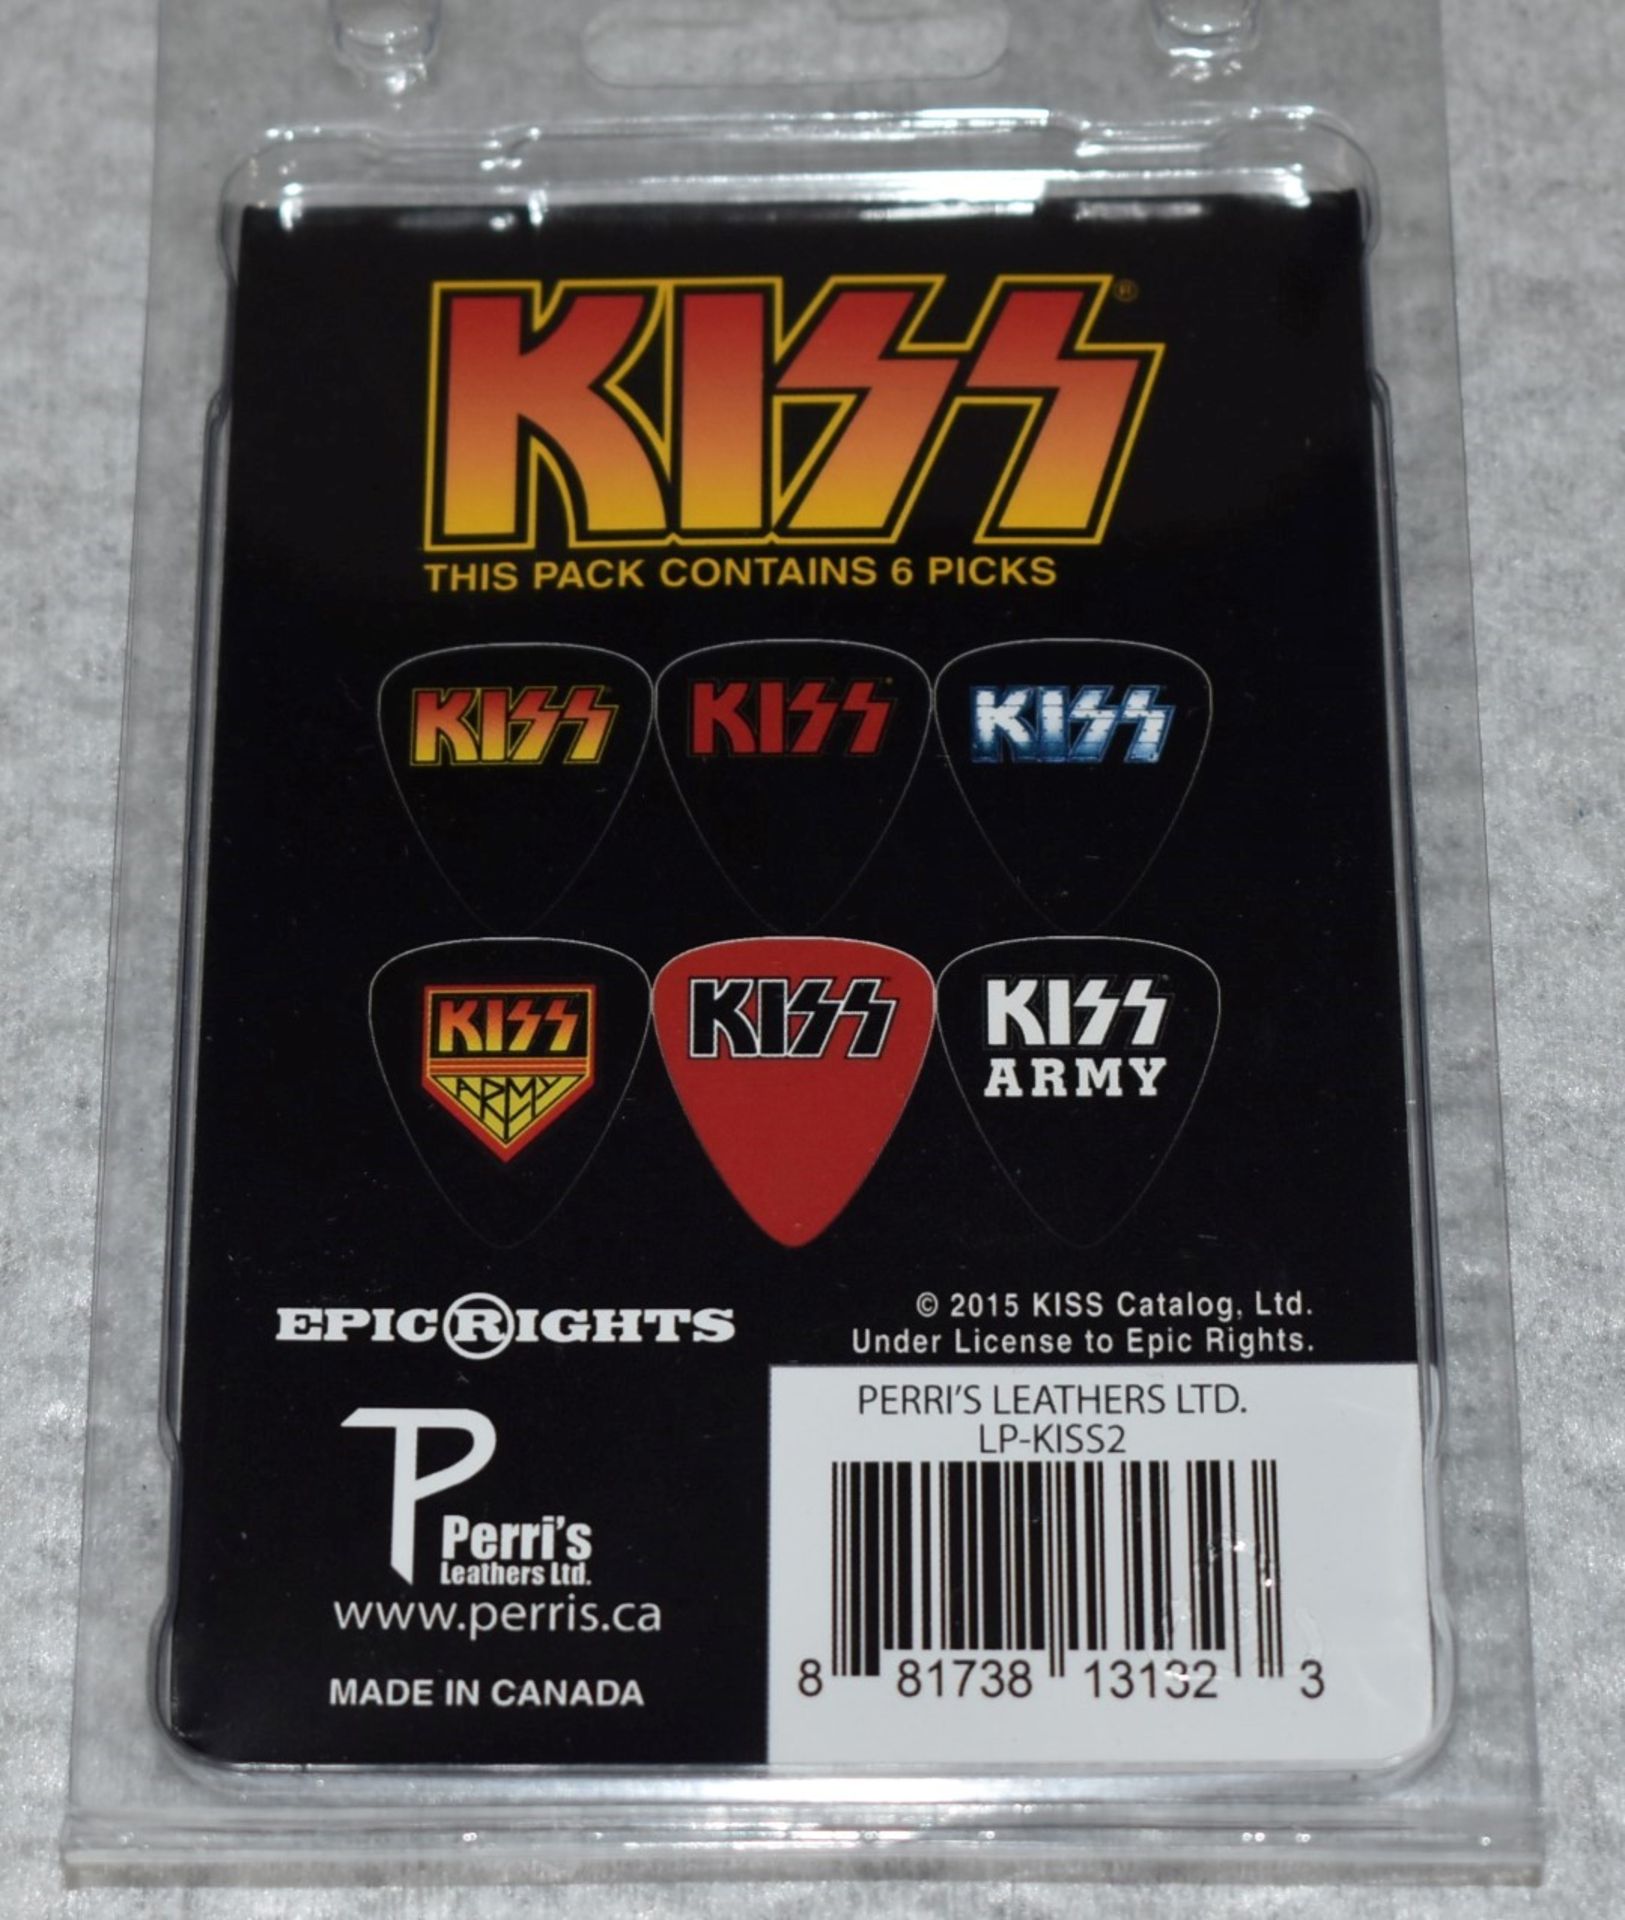 10 x Assorted Guitar Pick Multipacks By Perri's- 6 Picks Per Pack - Bowie, Pink Floyd, Kiss, Iron - Image 5 of 5